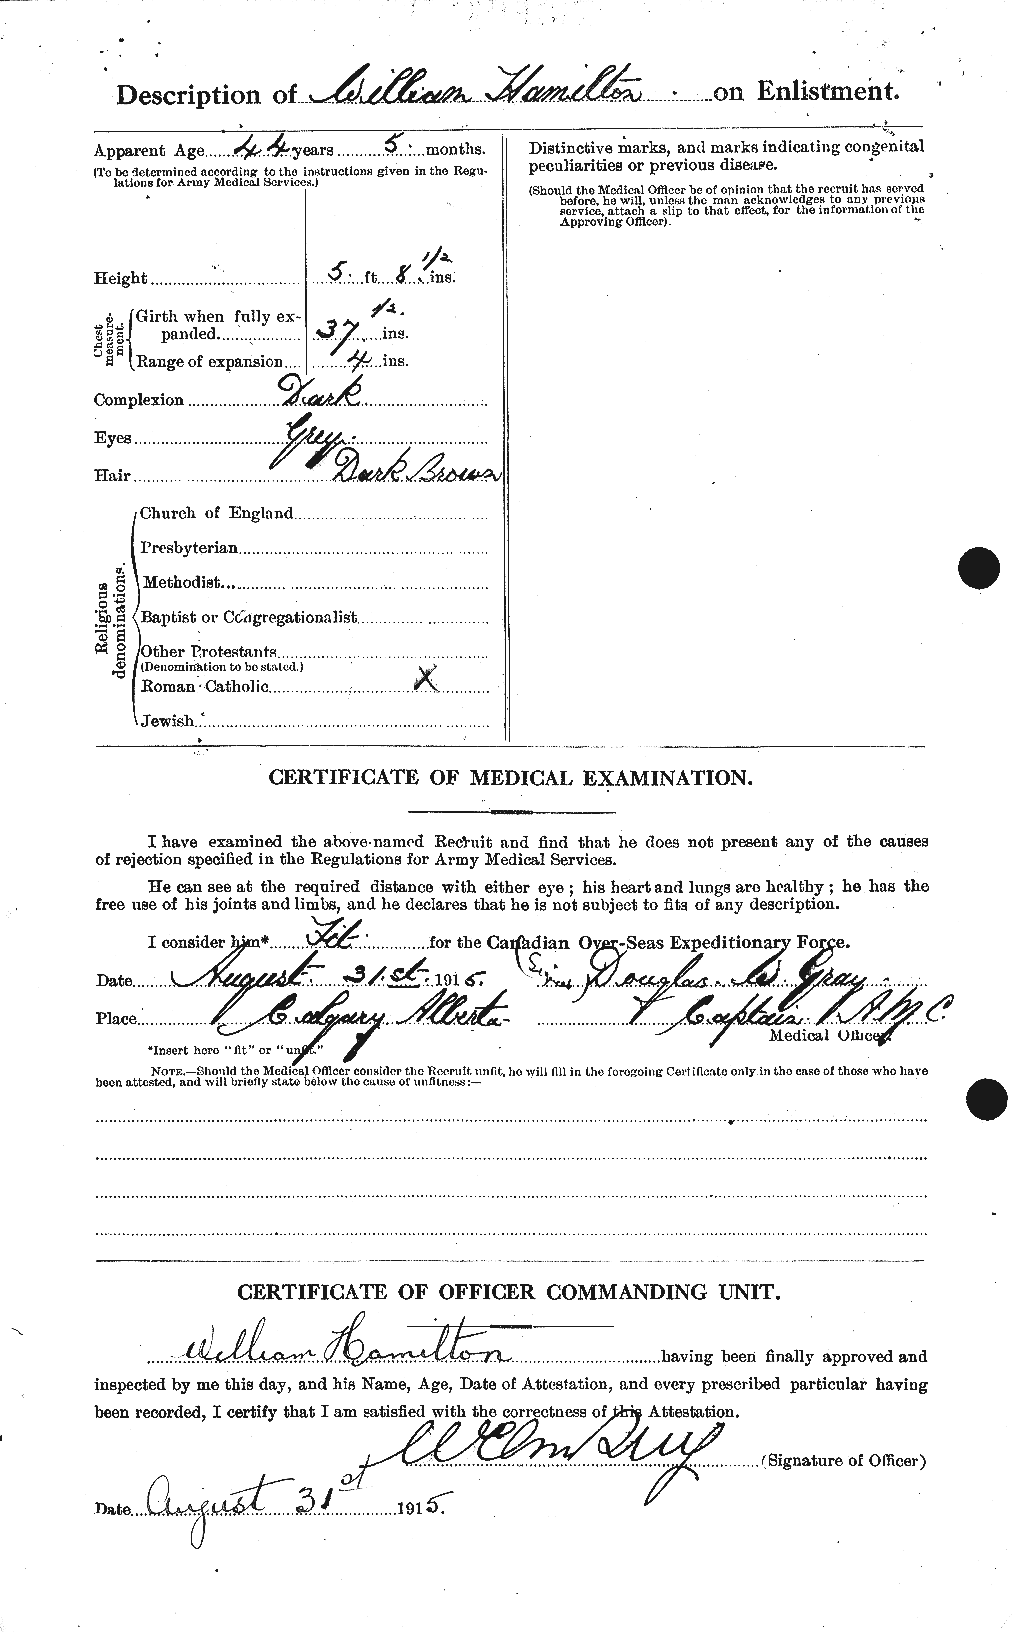 Personnel Records of the First World War - CEF 374836b